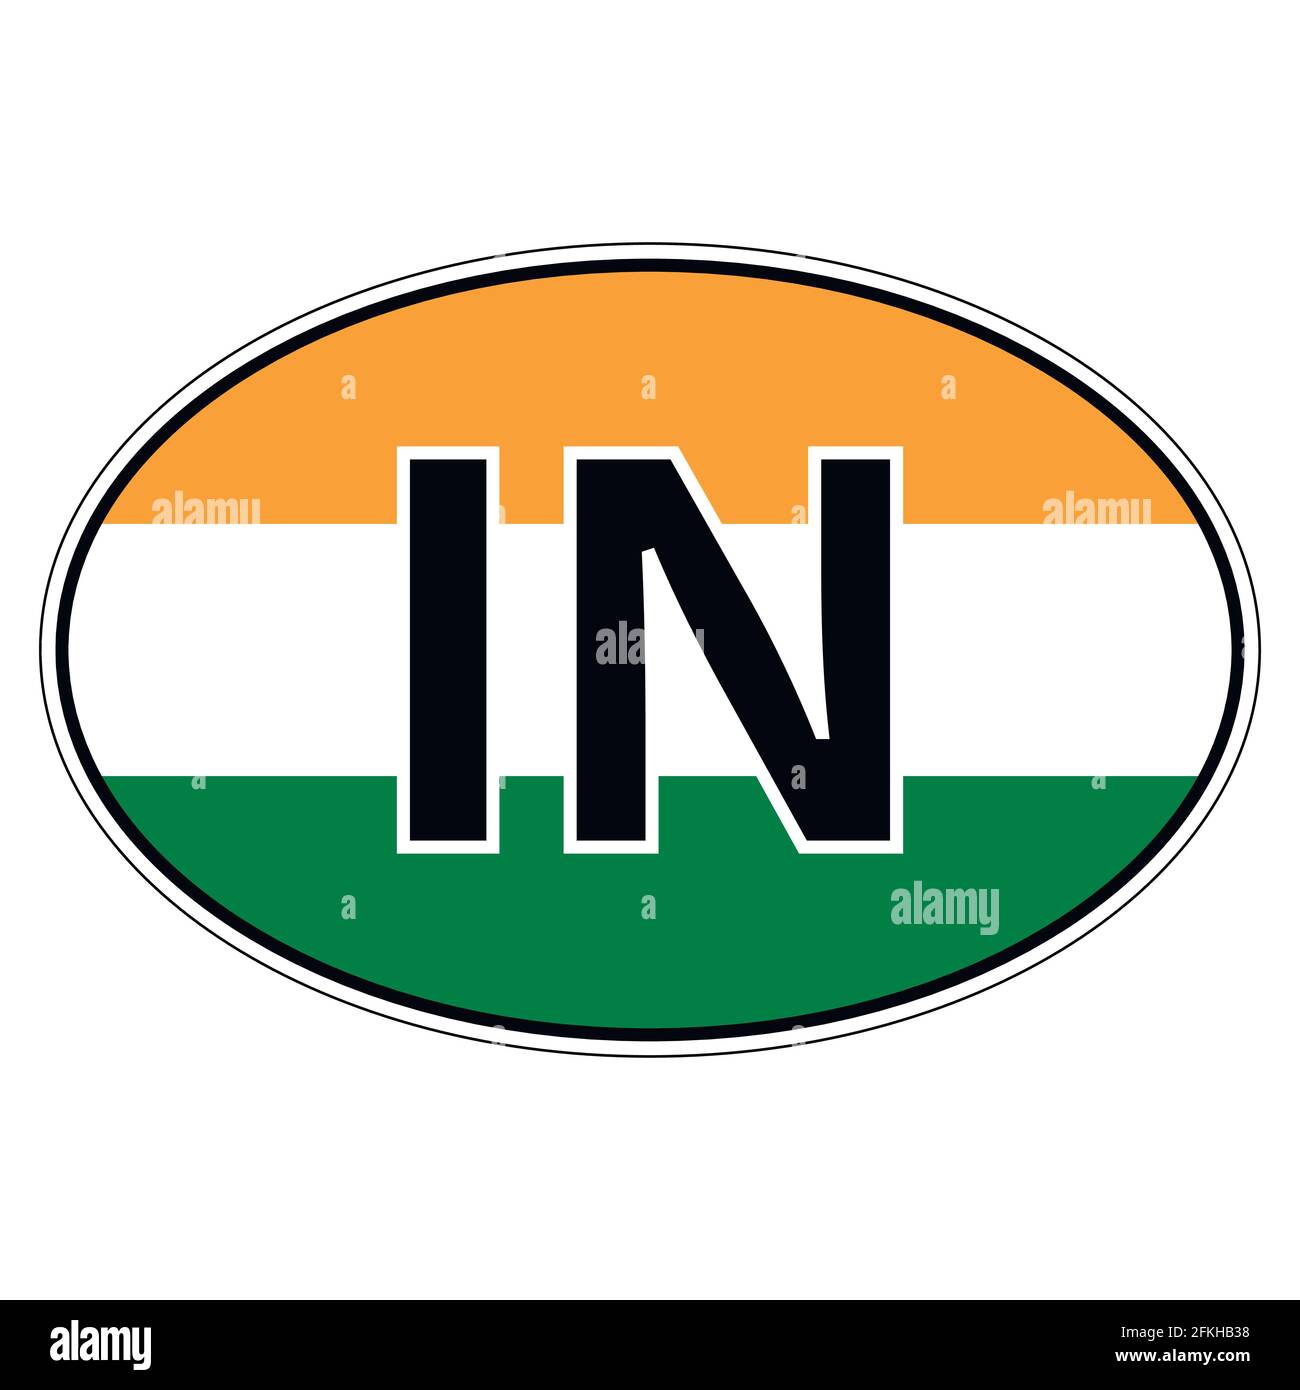 Sticker on car, flag of Republic of India Stock Vector